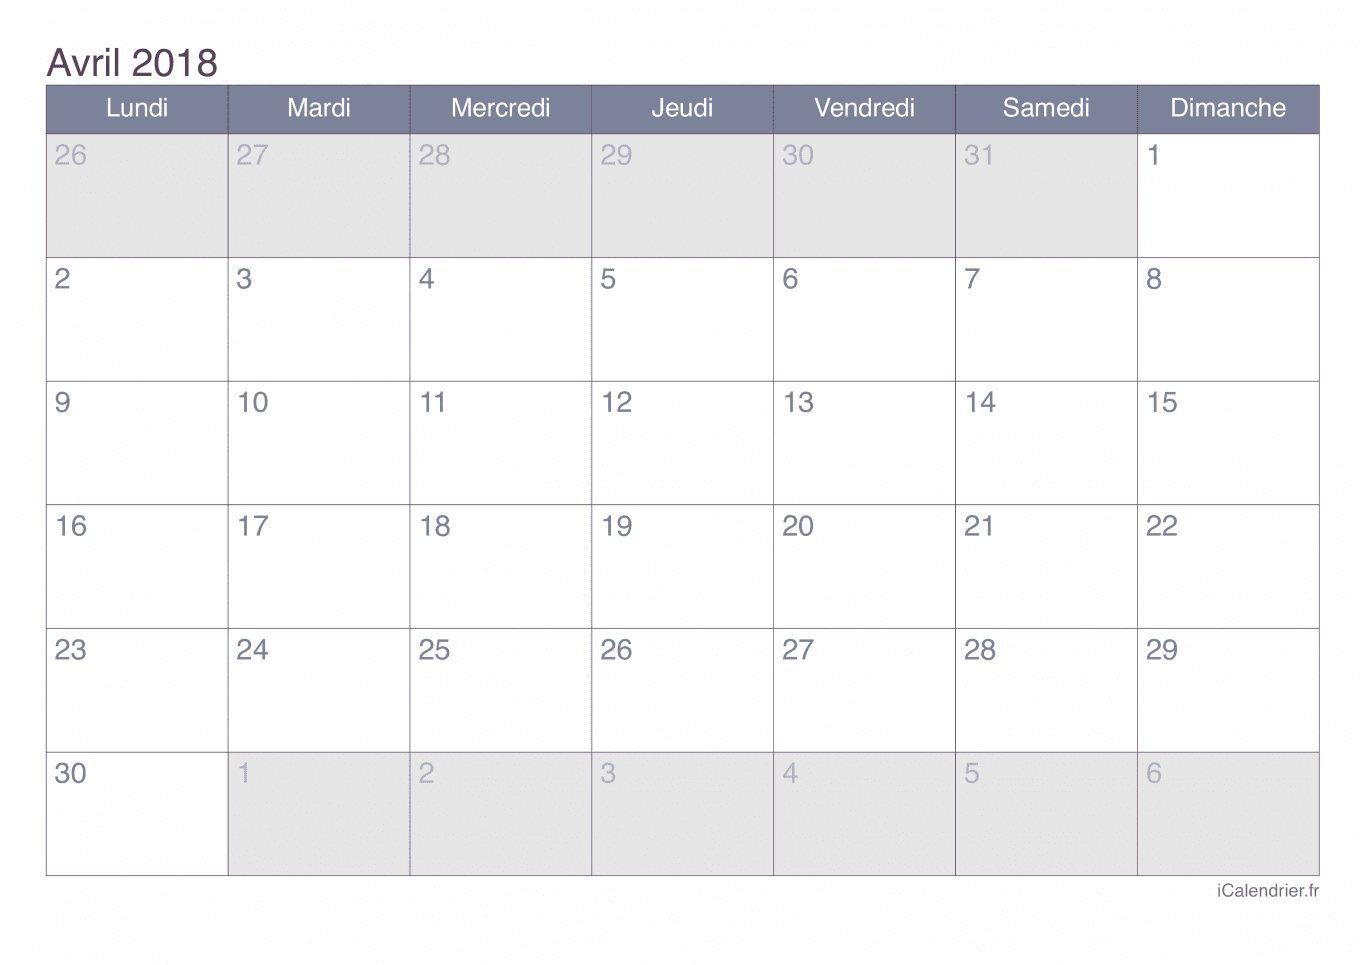 Calendrier d'avril 2018 - Office